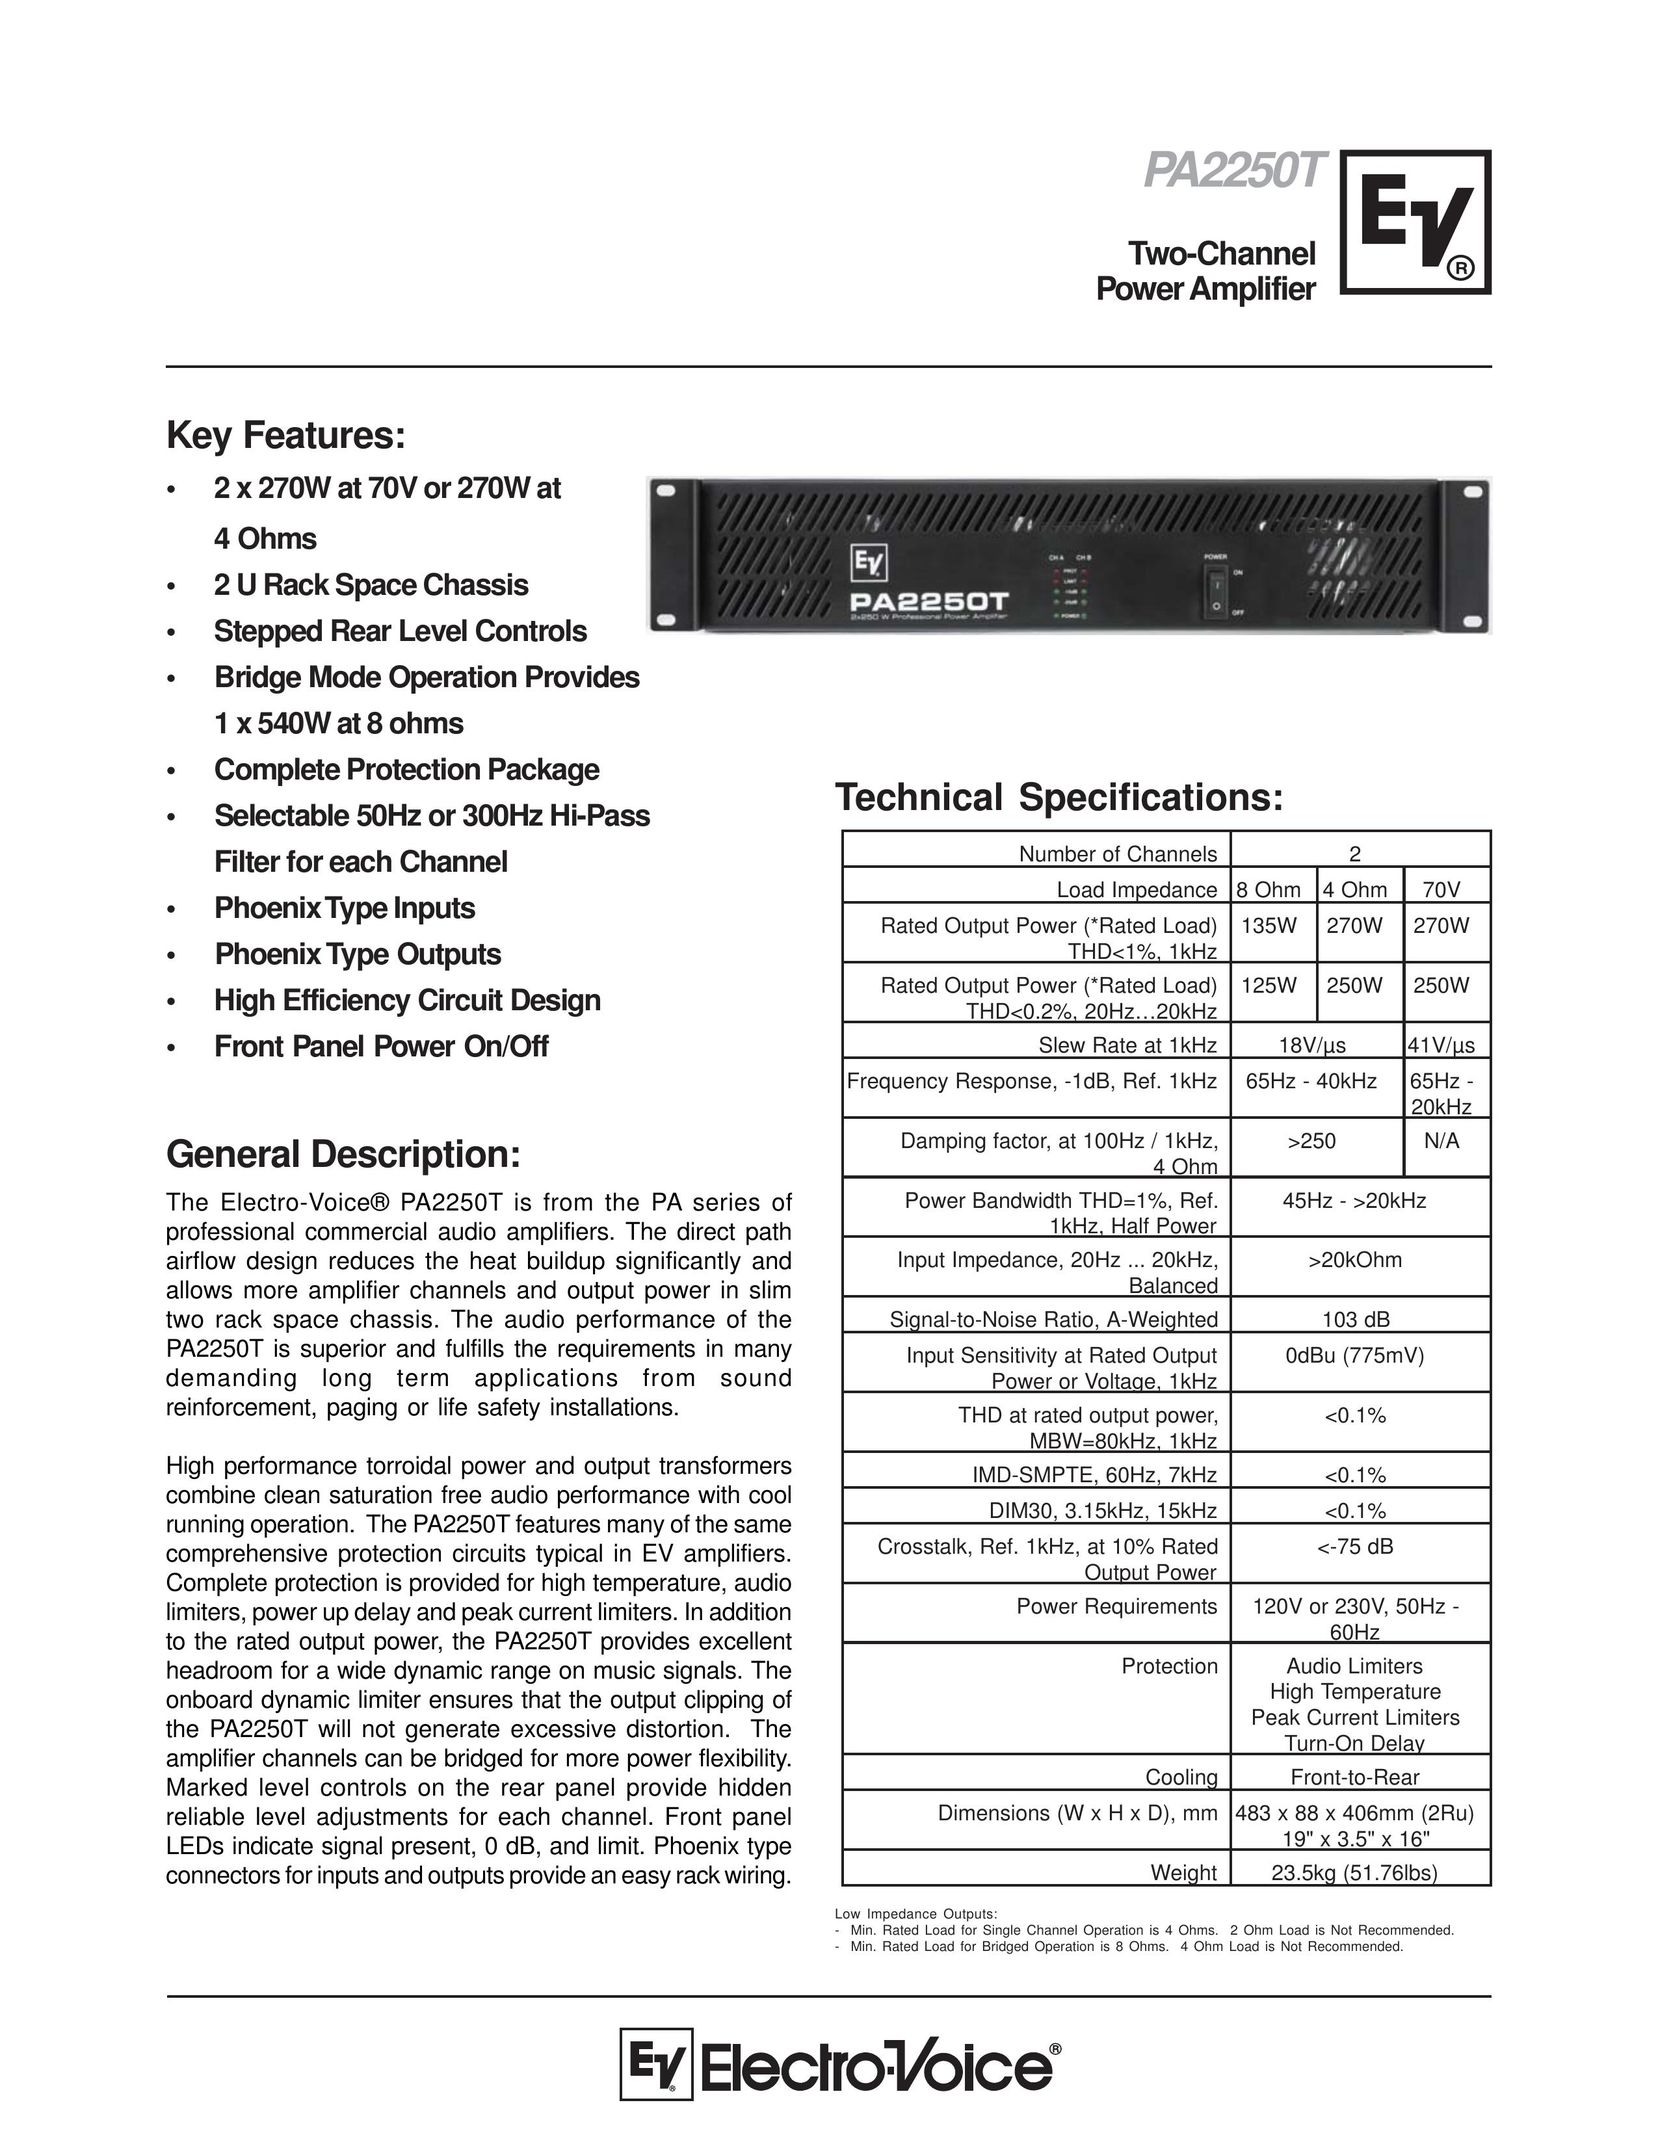 Electro-Voice PA2250T Stereo Amplifier User Manual